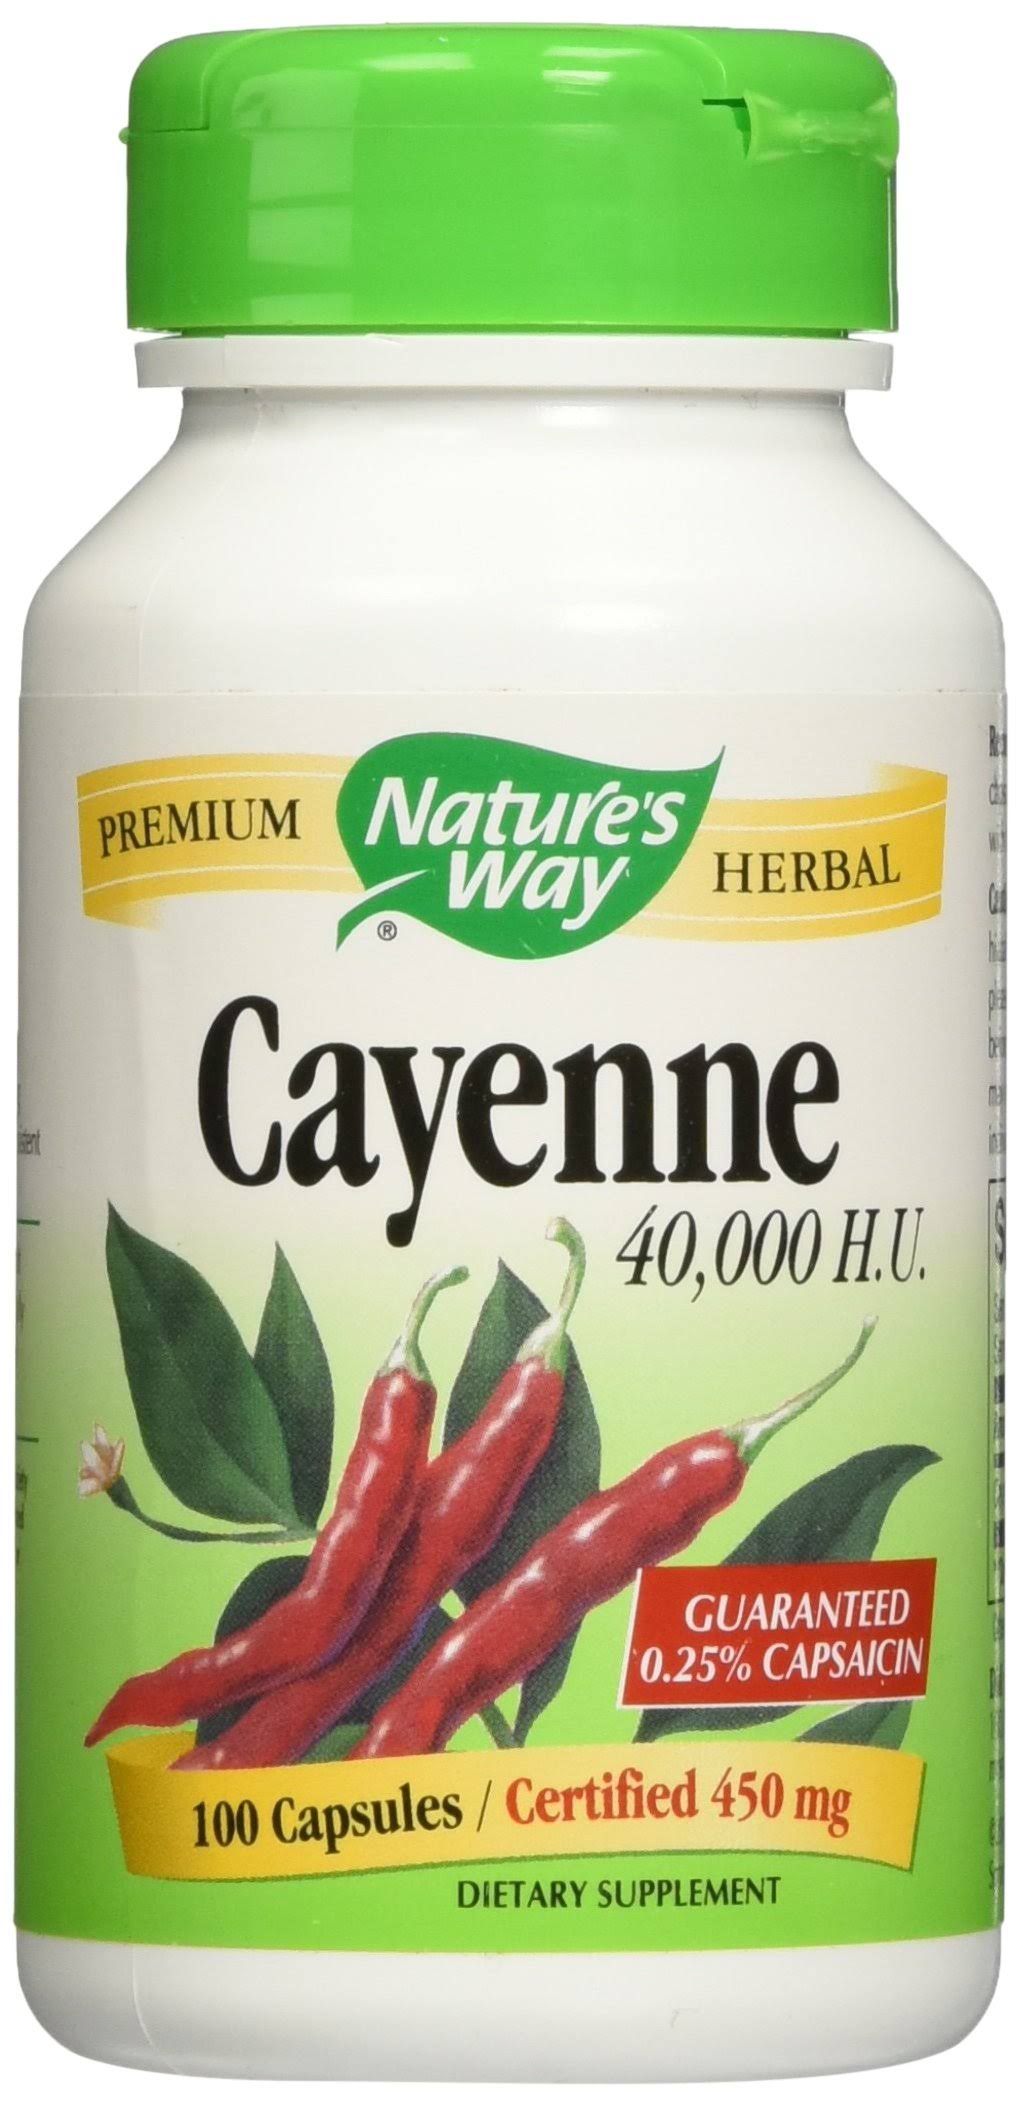 Nature's Way Cayenne Capsules